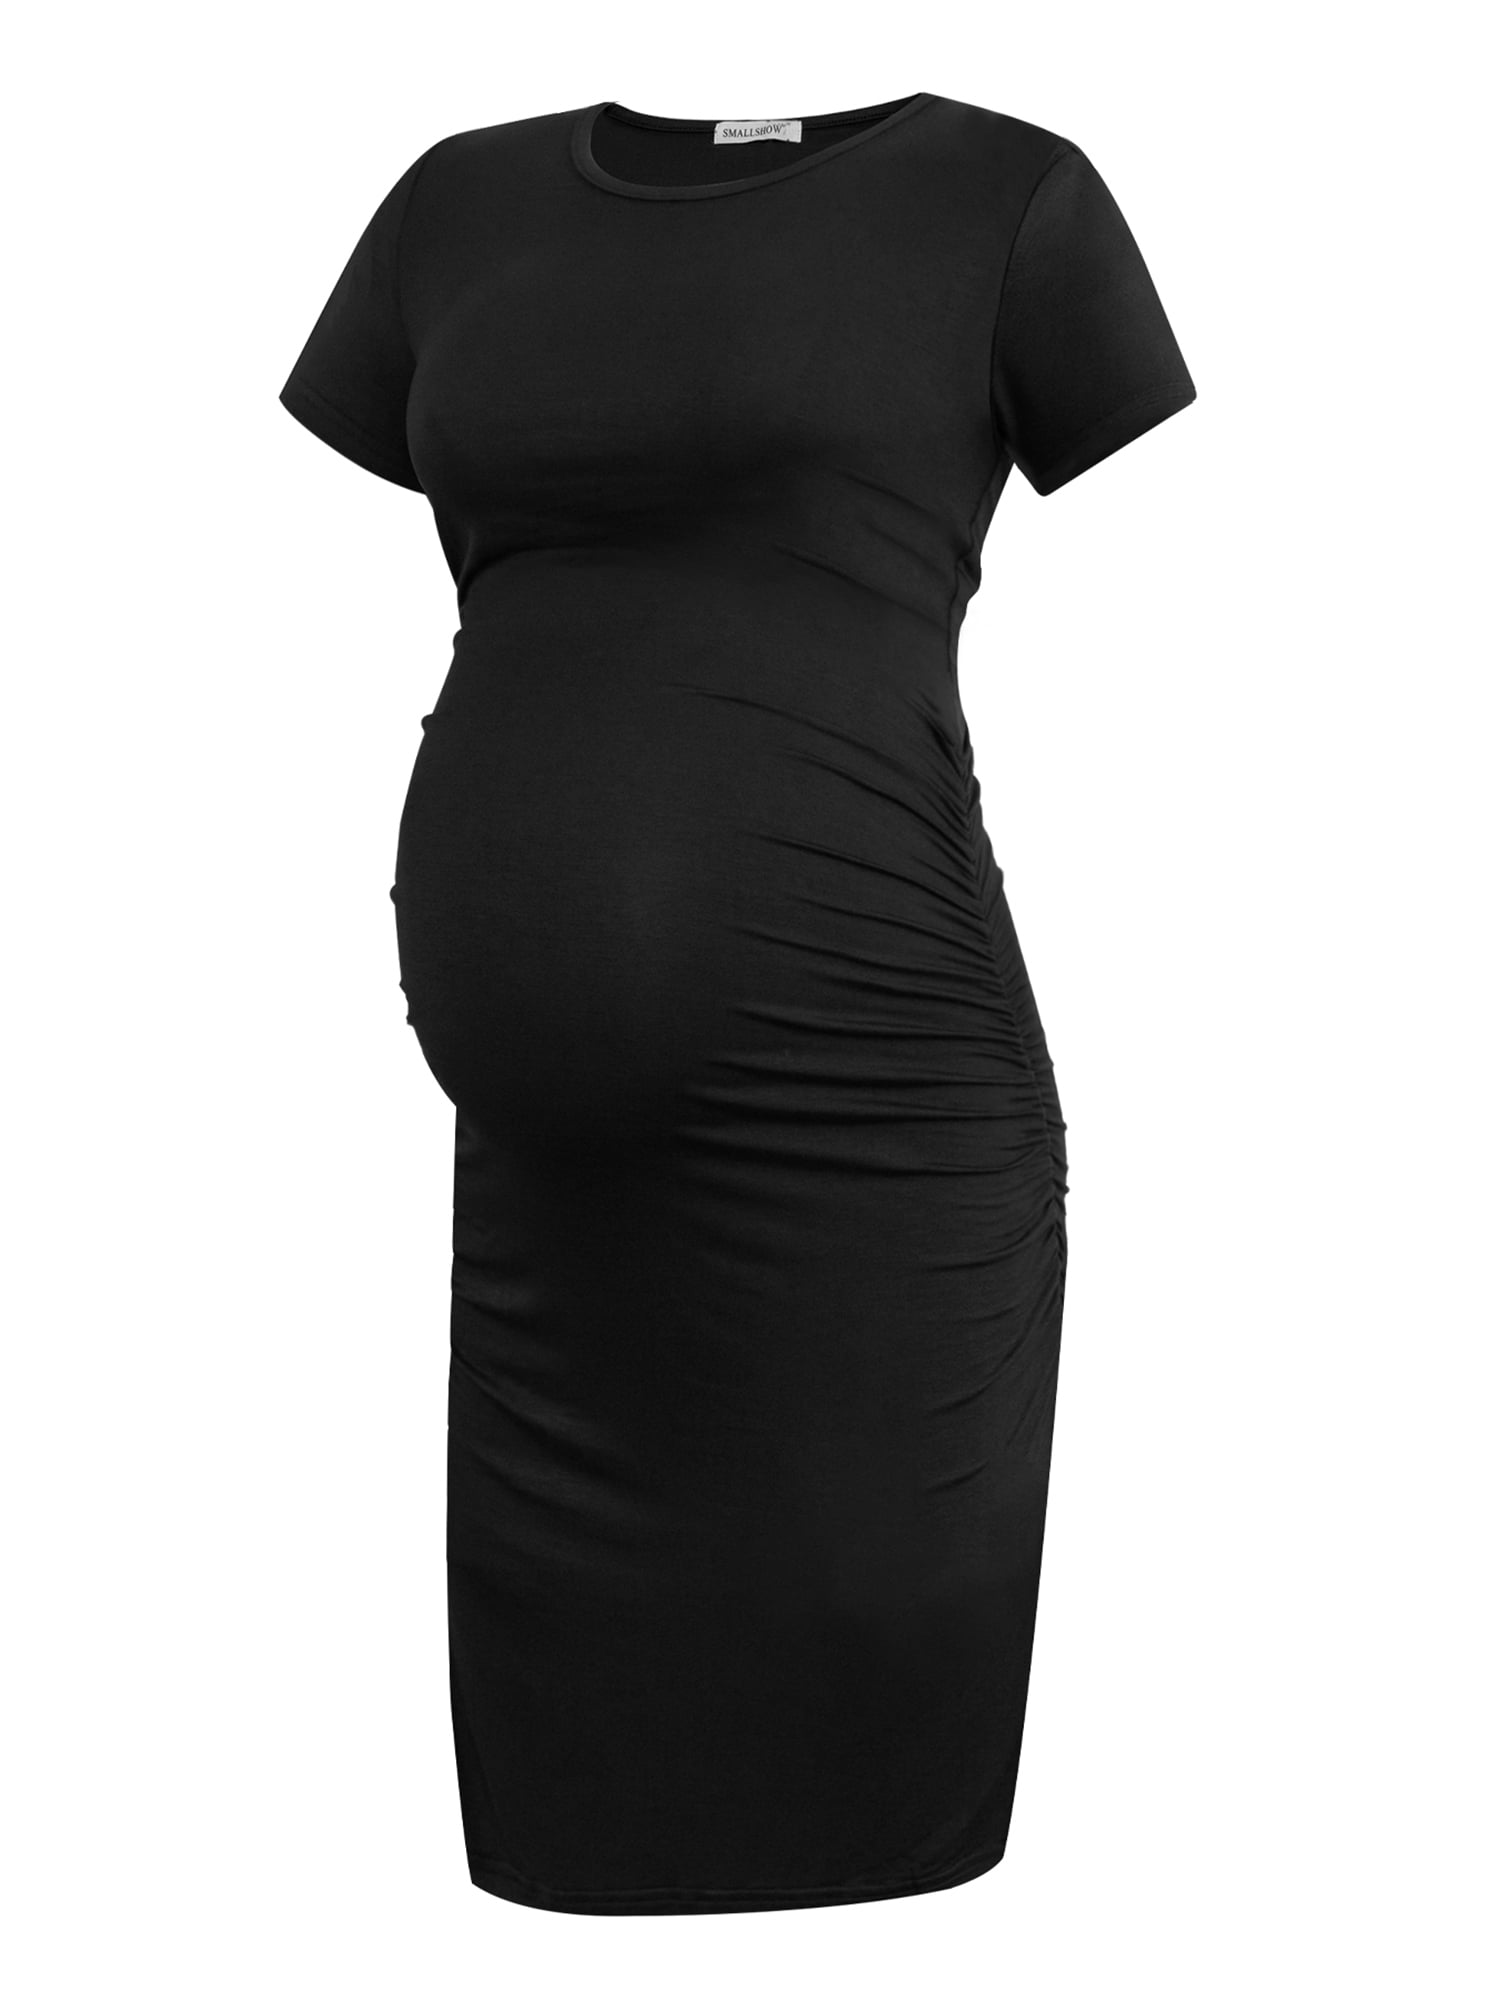 Smallshow Women's V Neck Bodycon Maternity Dress Side Ruched Pregnancy Clothes 